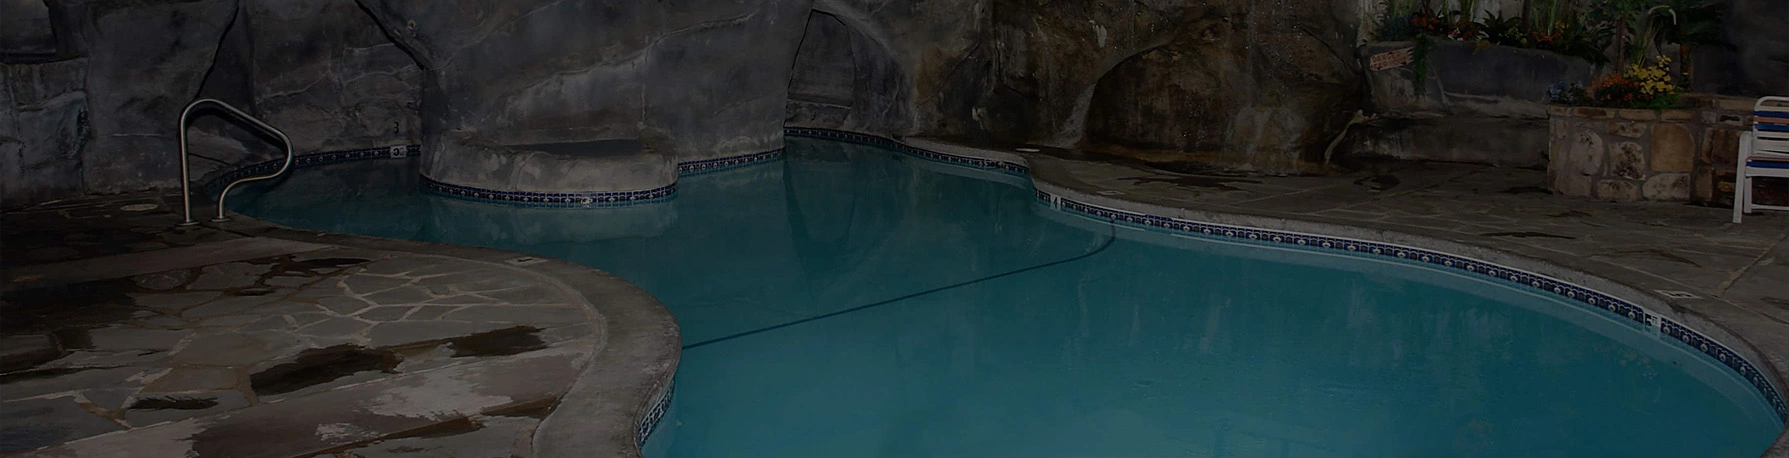 indoor pool at Sidney James Mountain Lodge